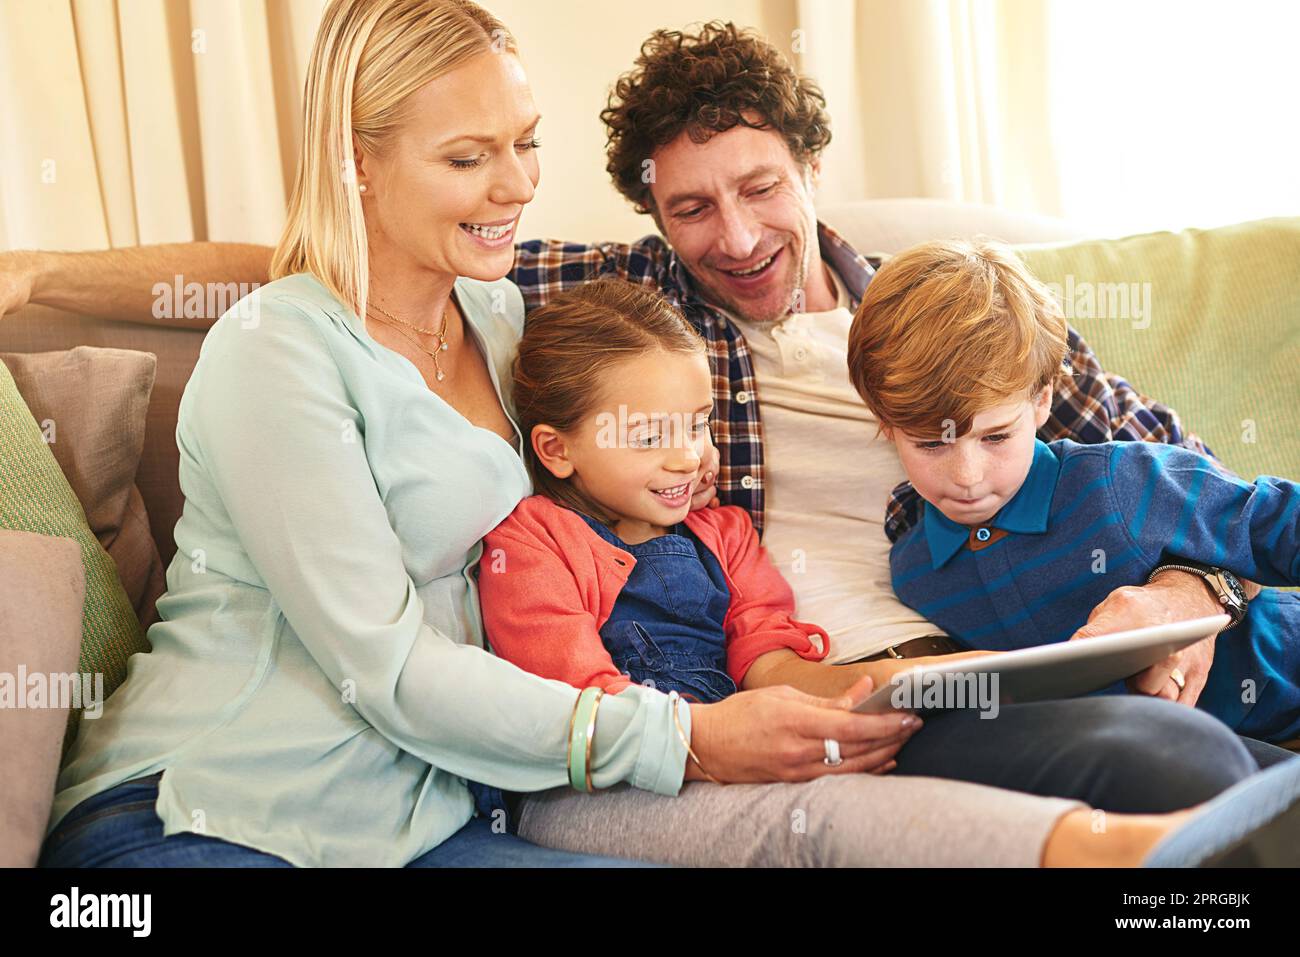 Weekend entertainment gone digital. a family browsing together on a digital tablet at home. Stock Photo